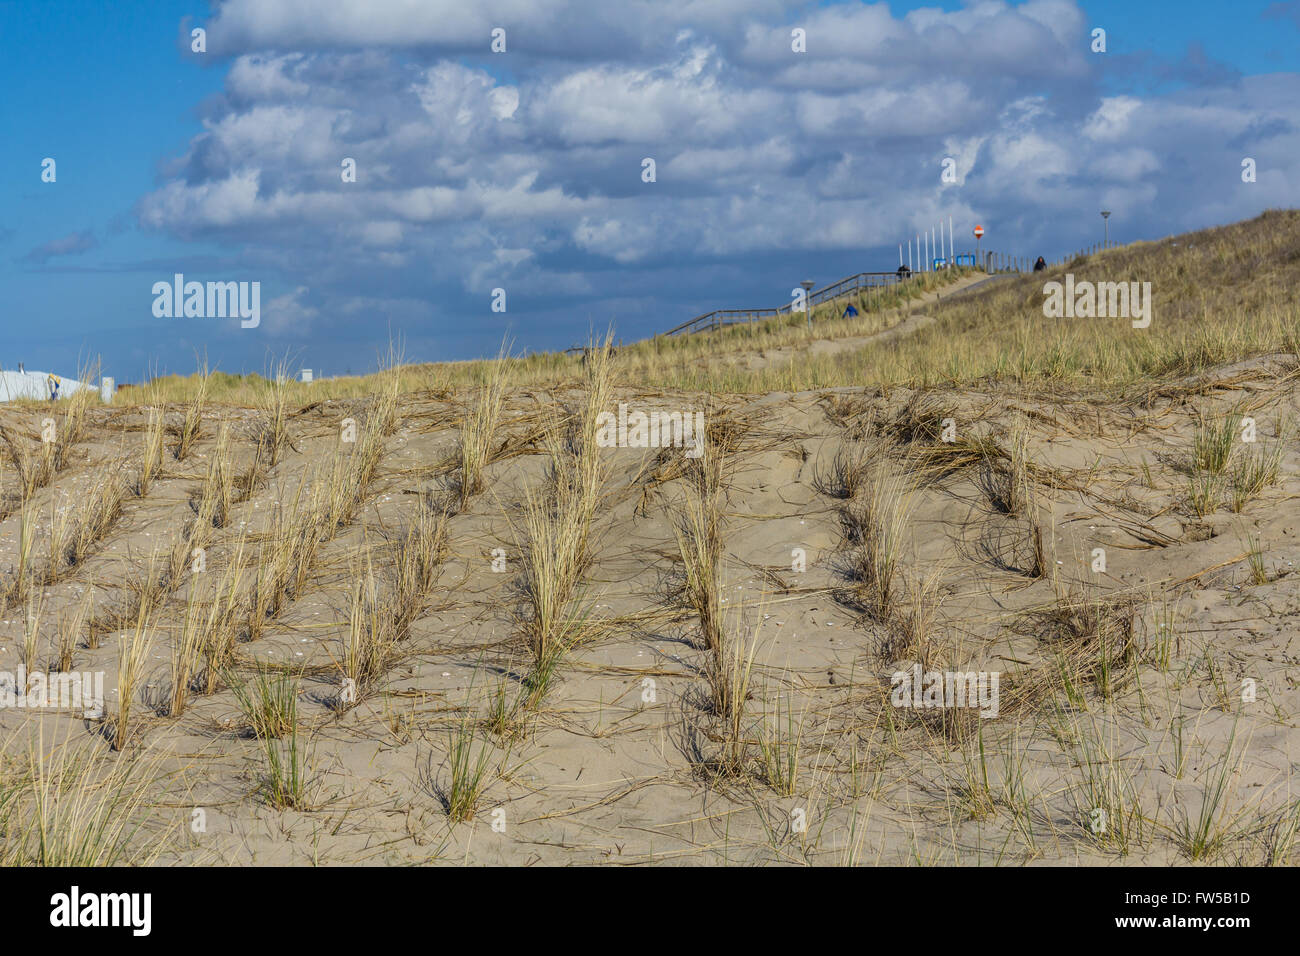 South Holland, the Netherlands - March 27, 2016: coastal defence sand dunes near The Hague. Stock Photo